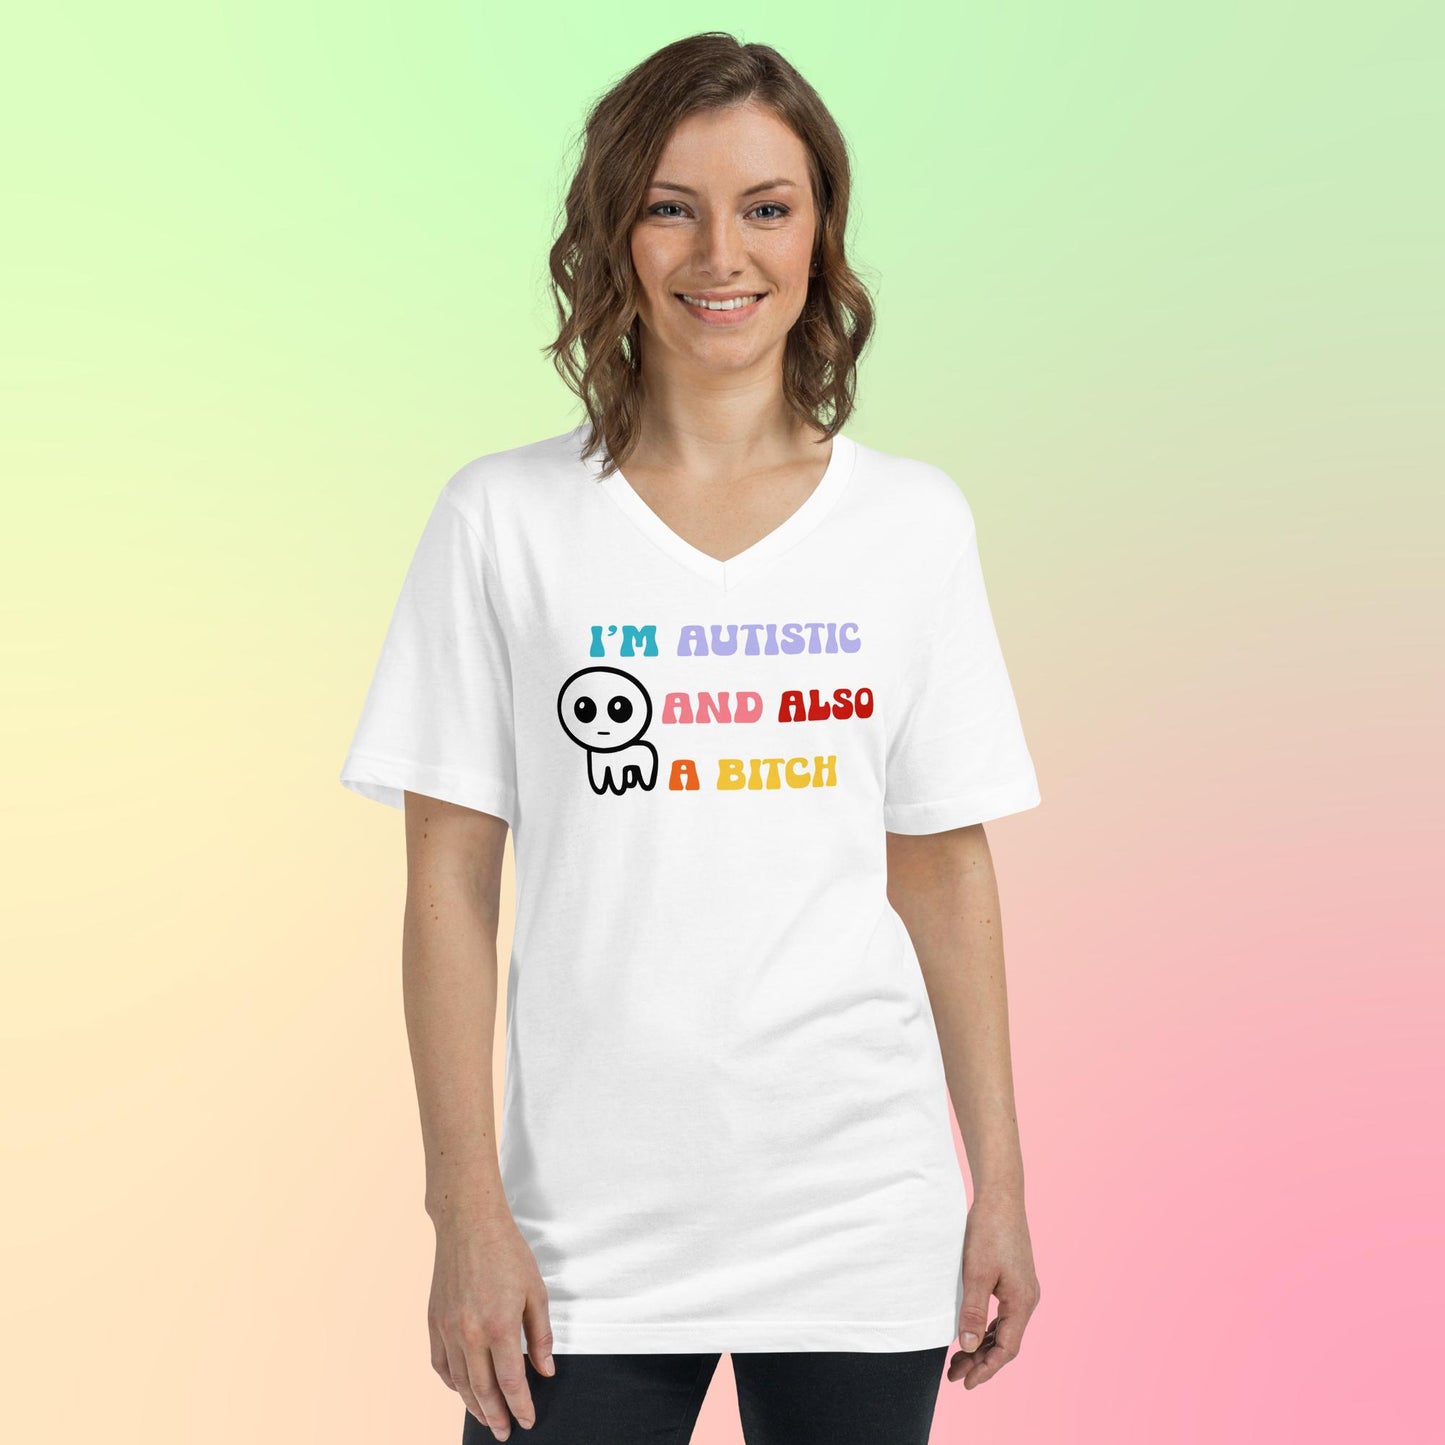 I'm autistic and also a bitch - Unisex Short Sleeve V-Neck T-Shirt